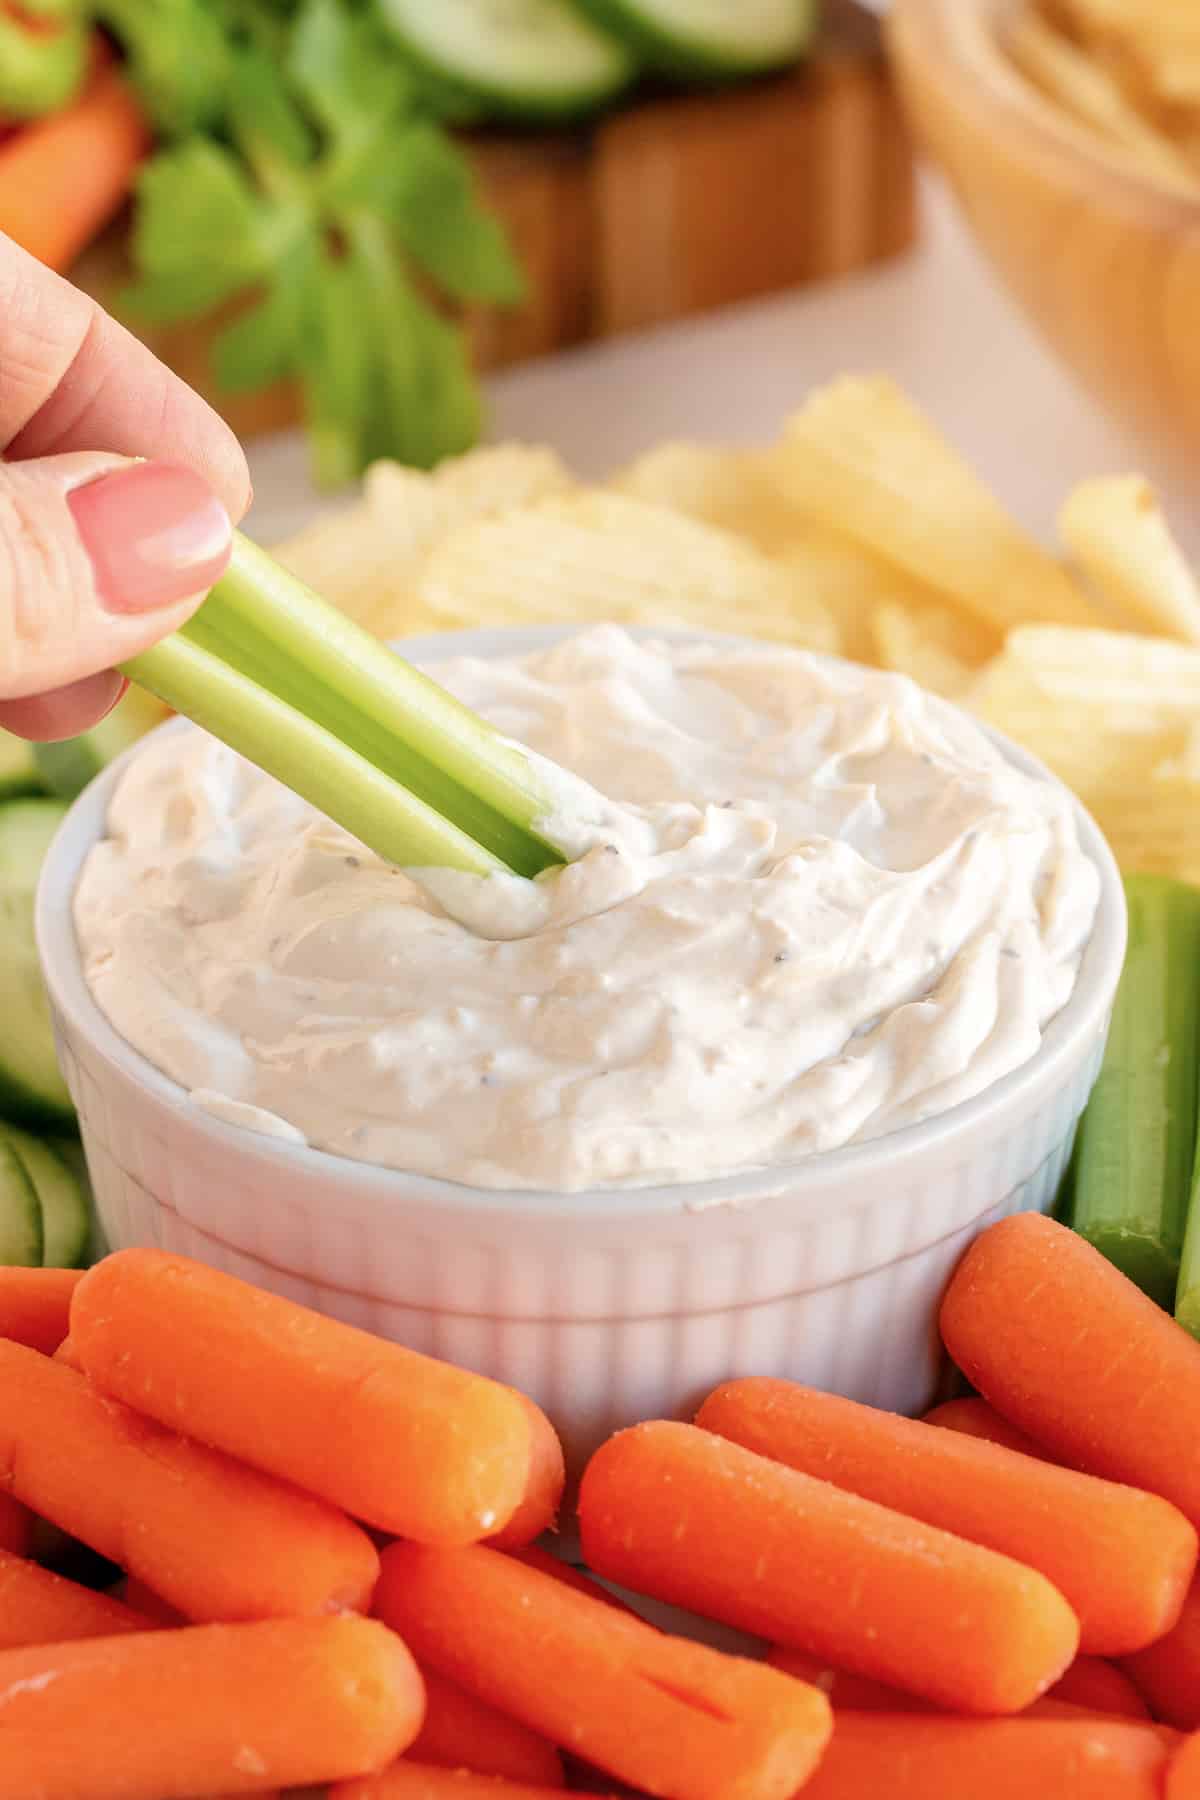 A hand dipping celery into onion dip.